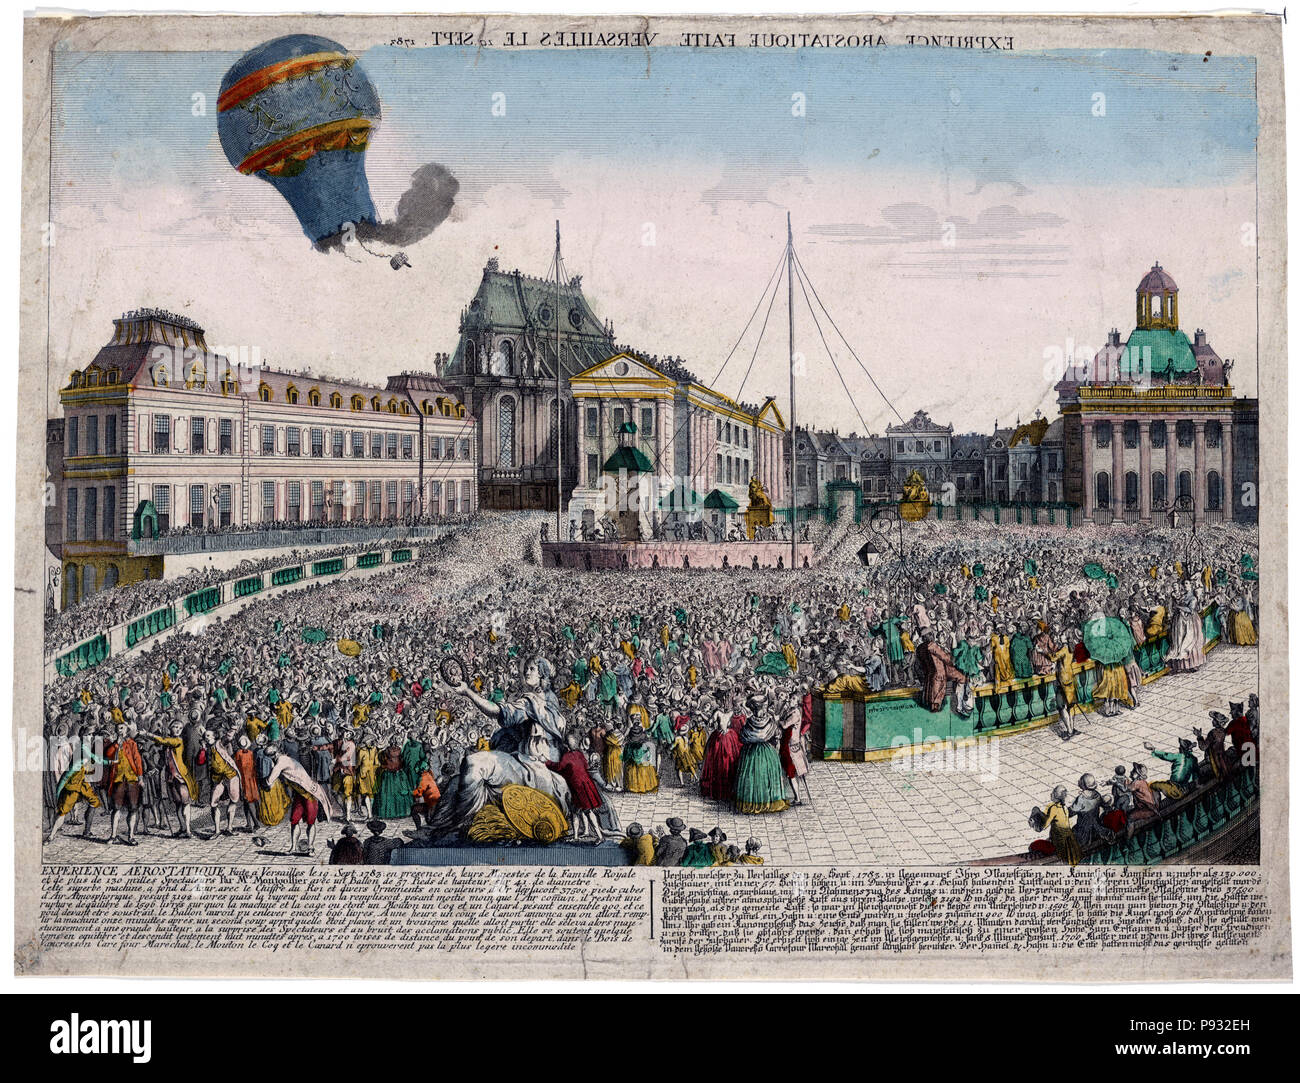 Vue d'optique shows the balloon launched by the Montgolfier brothers ascending from the Palace of Versailles, France, before the royal family, September 19, 1783. Stock Photo